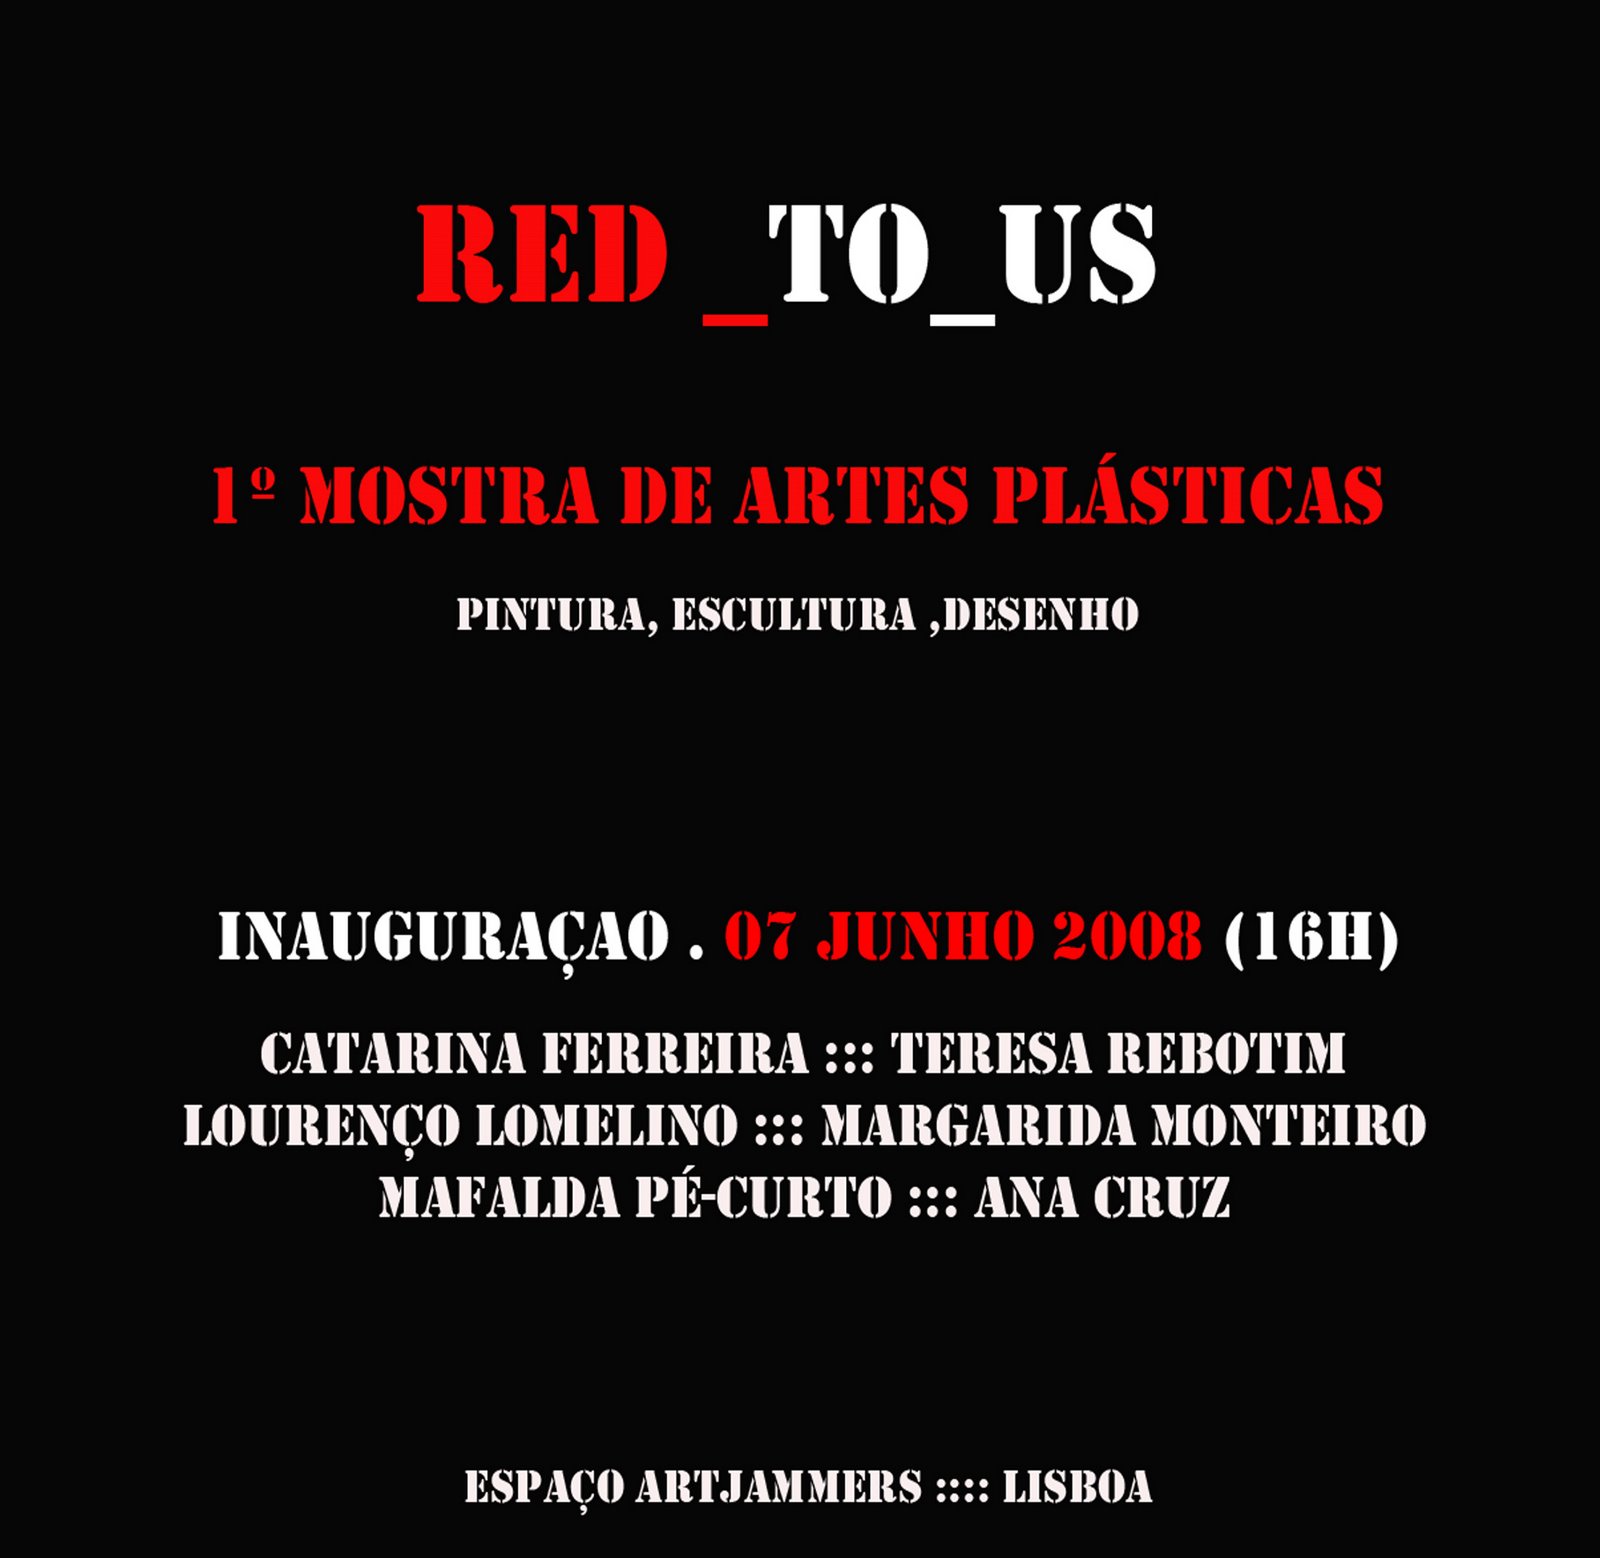 [RED+TO+US+VERSO.jpg]